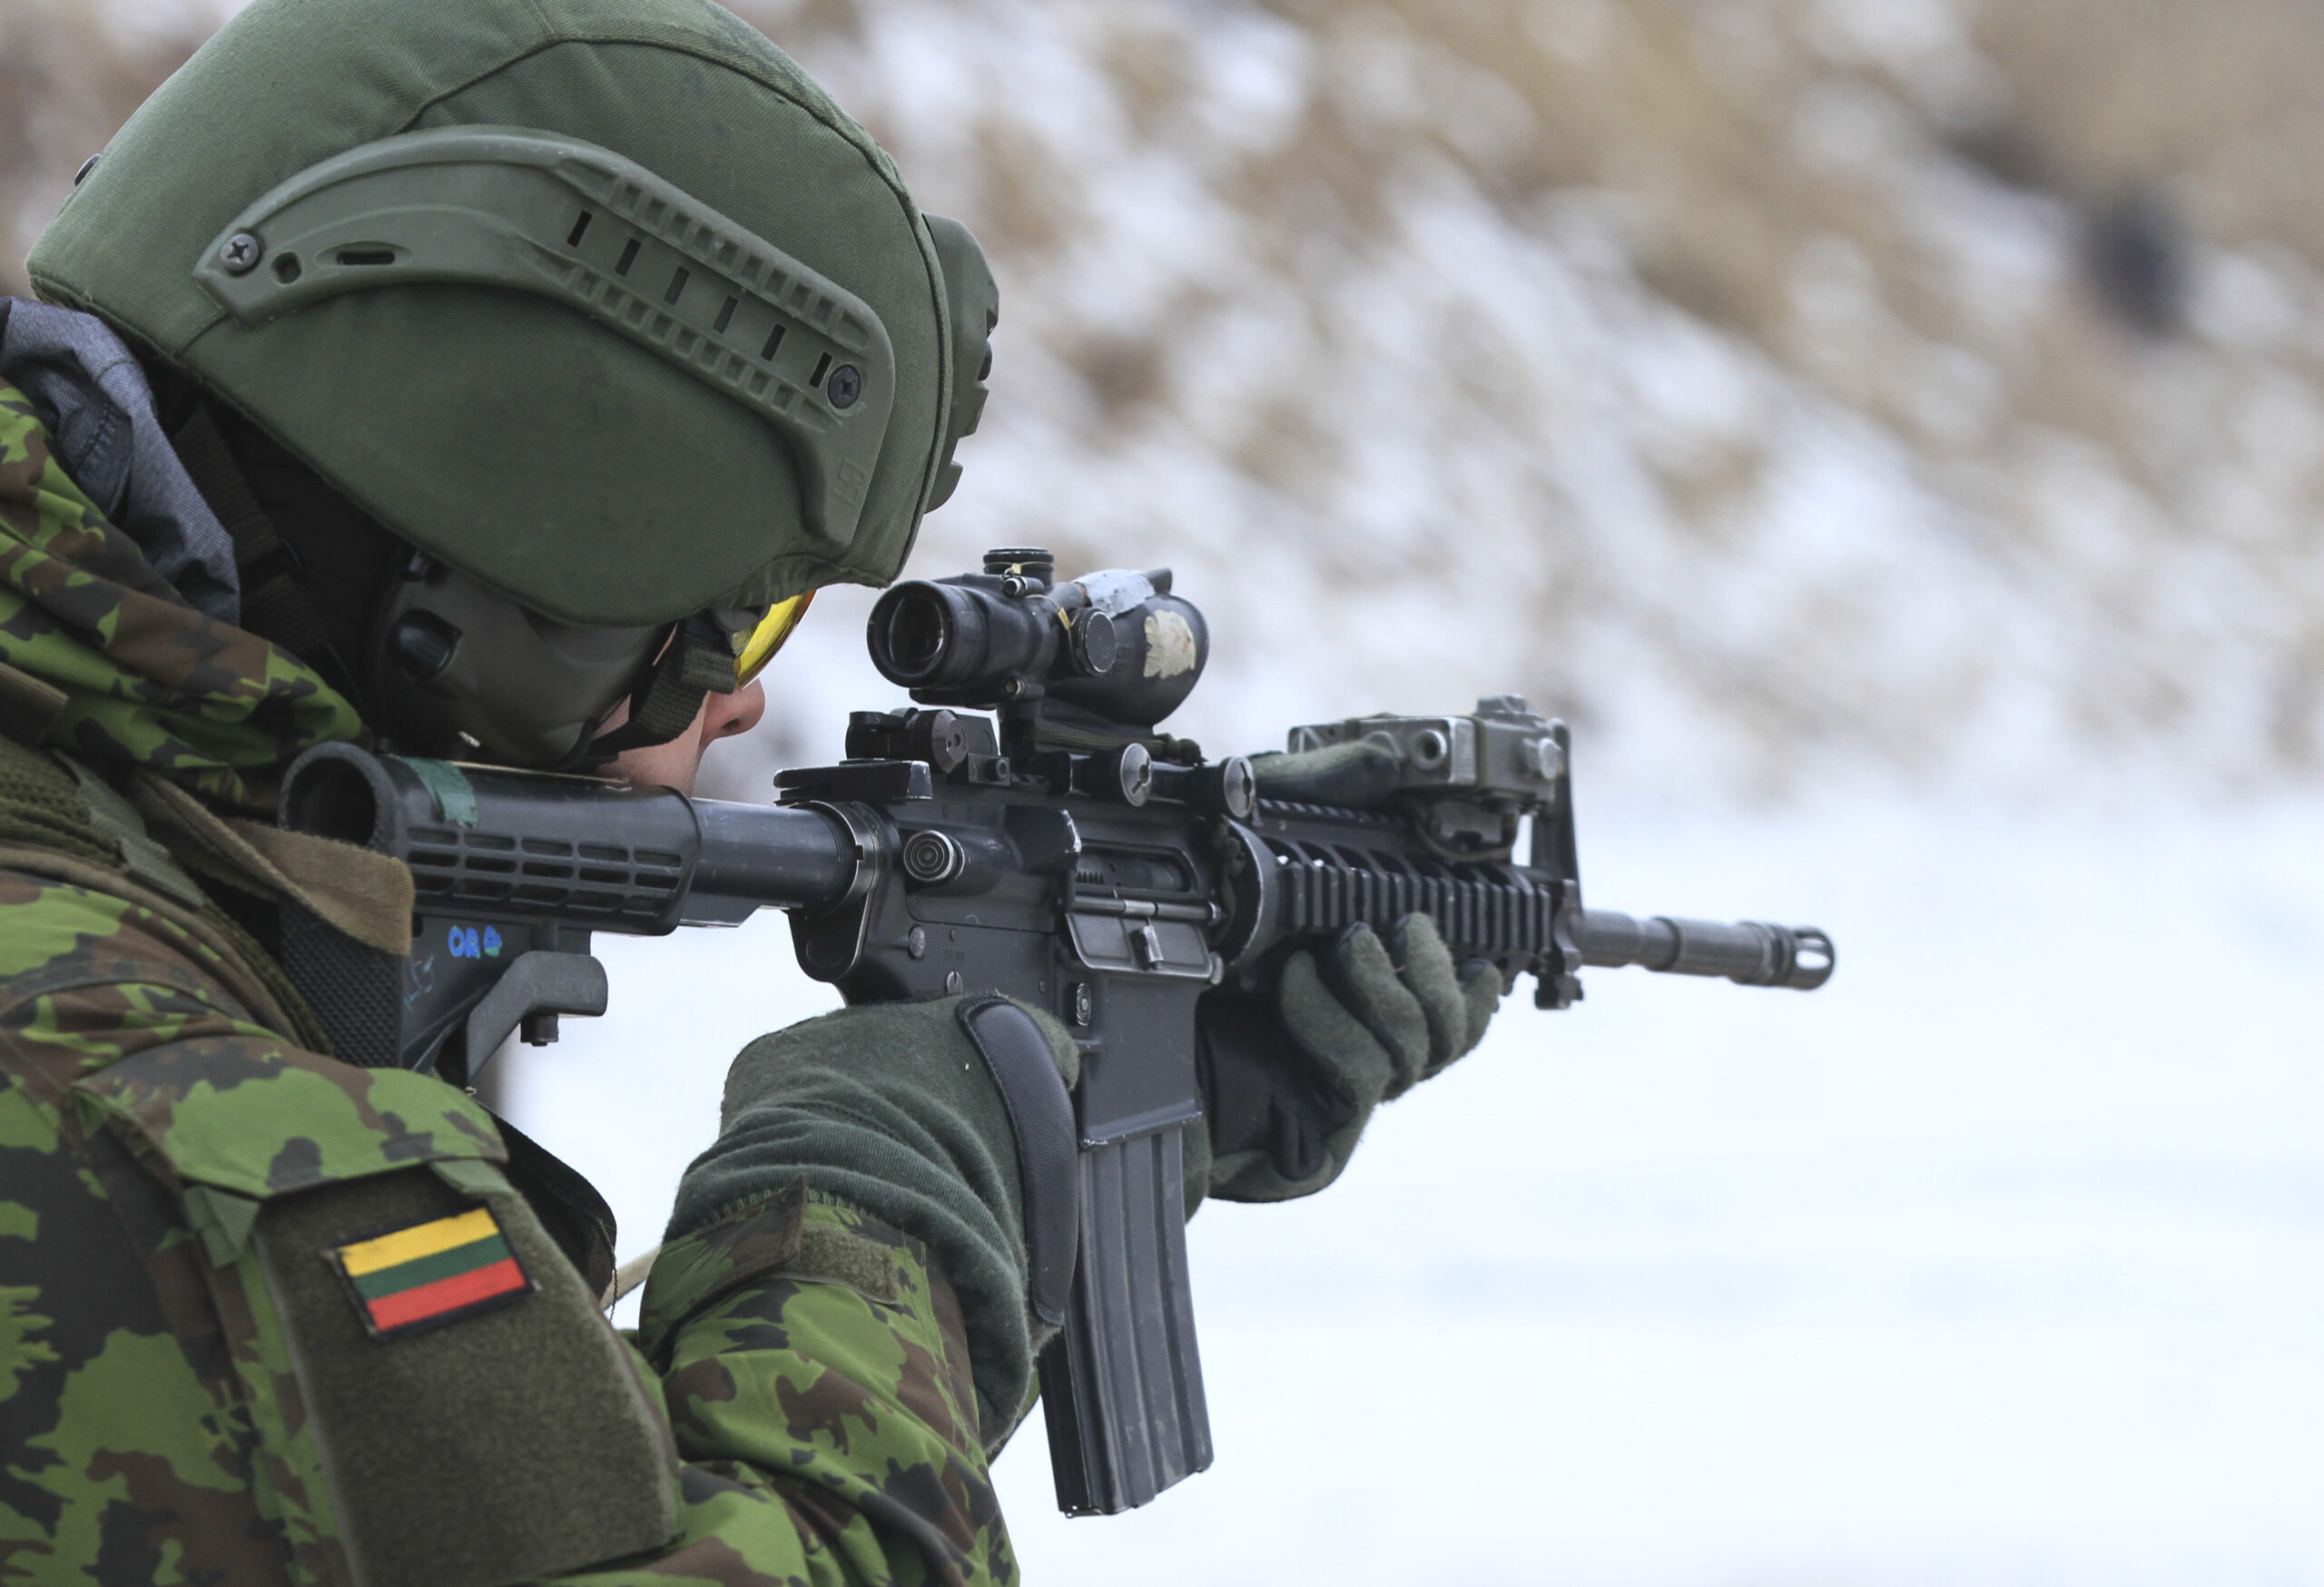 RUKLA, Lithuania – A Lithuanian soldier assigned to the Iron Wolf Mechanized Infantry Brigade, acquires his target with an M4 carbine during Close Quarter Marksmanship training with U.S. Paratroopers assigned to Able Company, 2nd Battalion, 503rd Infantry Regiment, 173rd Airborne Brigade, in Rukla, Lithuania, Jan. 24, 2017. The training was part of a two-week course that built camaraderie and expertise among both U.S. Paratroopers and Lithuanian soldiers. The ‘Sky Soldiers’ of 2nd Bn., 503rd Inf. Regt. are on a training rotation in support of Atlantic Resolve, a U.S. led effort in Eastern Europe that demonstrates U.S. commitment to the collective security of NATO and dedication to enduring peace and stability in the region. The 173rd Airborne Brigade, based in Vicenza, Italy, is the Army Contingency Response Force in Europe, and is capable of projecting forces to conduct a full range of military operations across the United States European, Central and Africa Command areas of responsibility within 18 hours. (U.S. Army photo by Sgt. Lauren Harrah/Released)